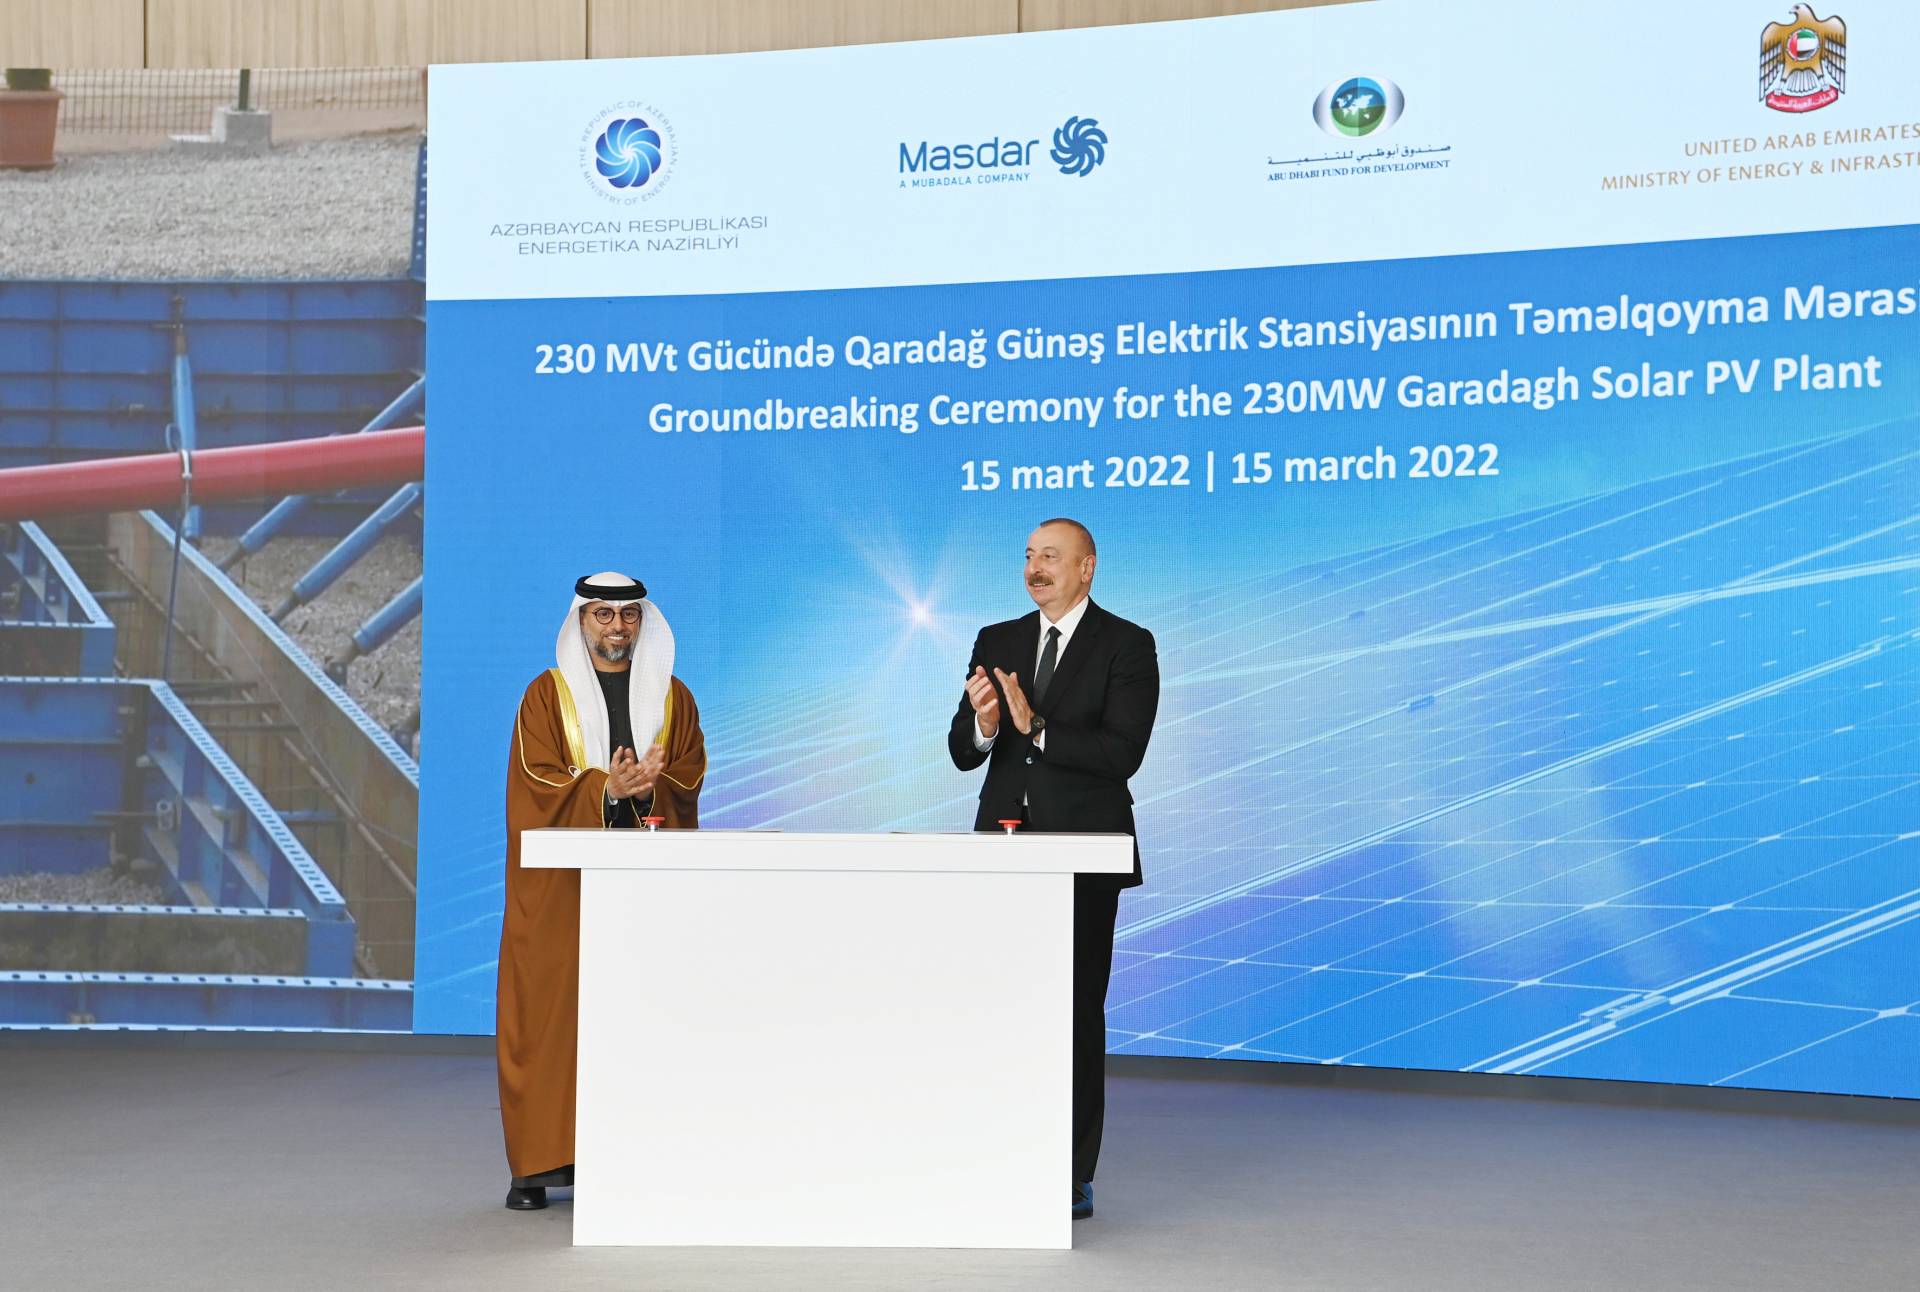 A groundbreaking ceremony has been held for the 230 MW Garadagh Solar Power Plant